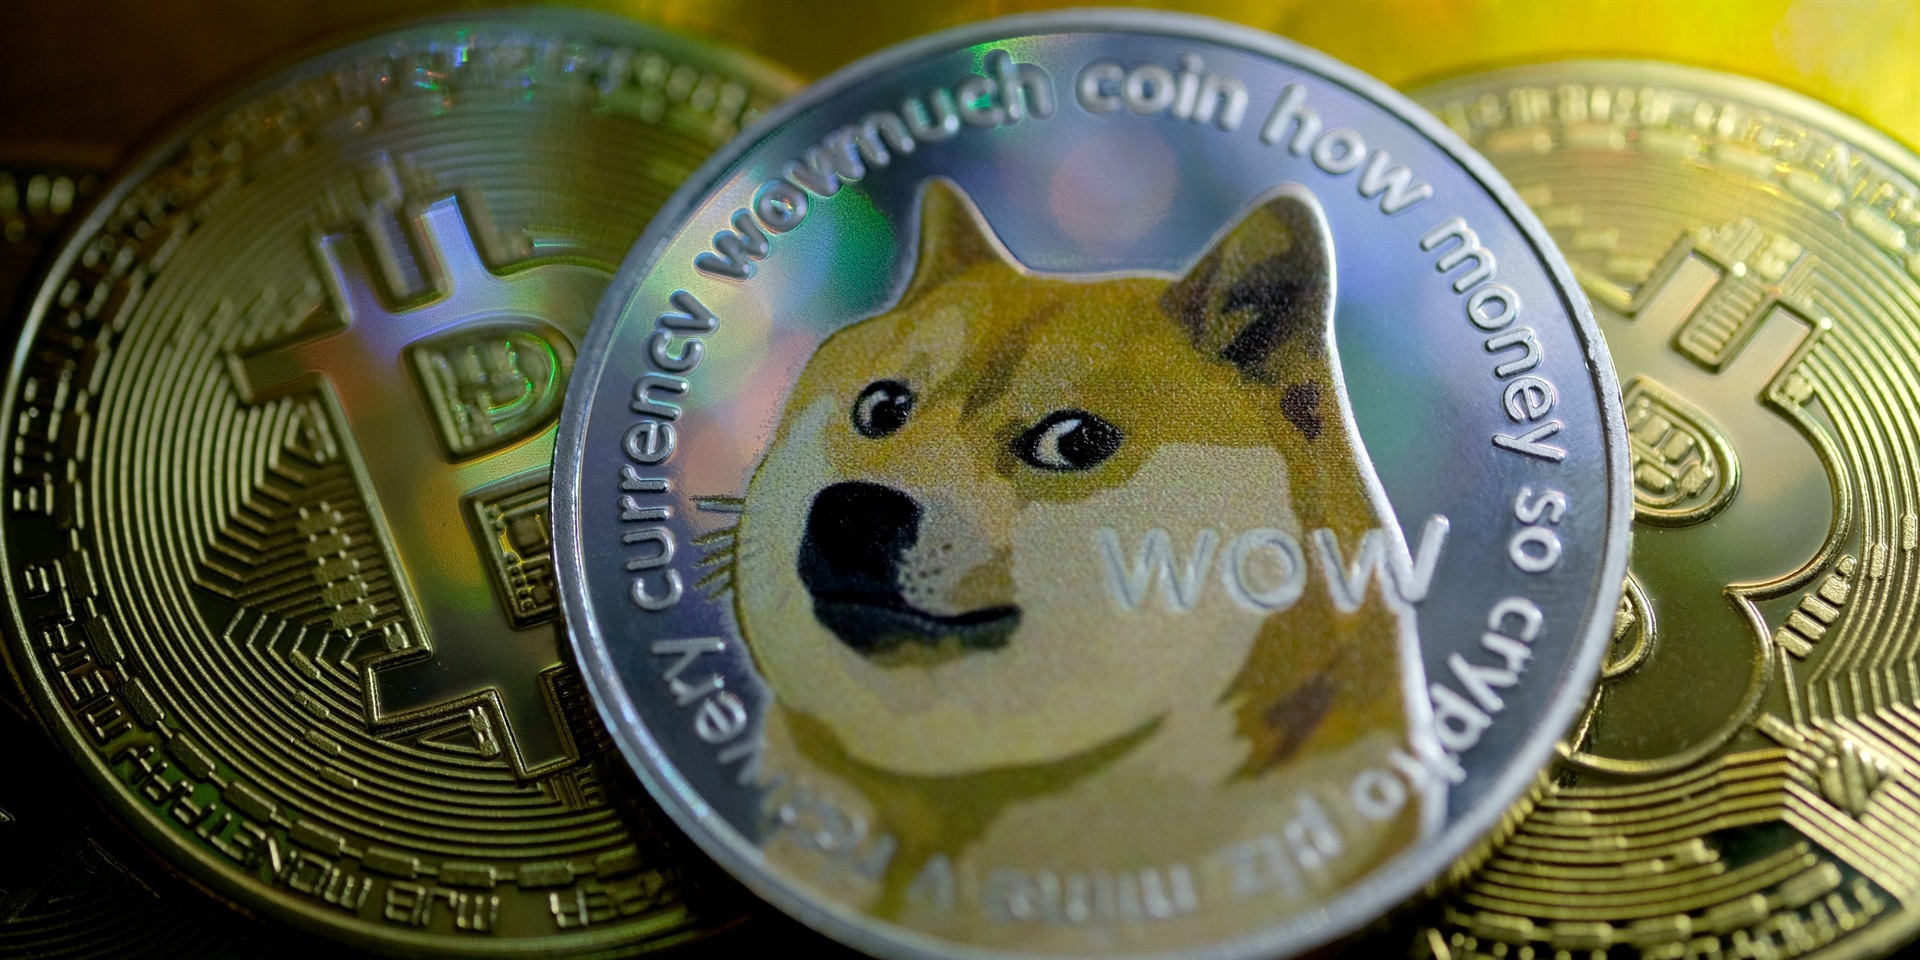 The world's biggest holder of Dogecoin owns 28% of the ...